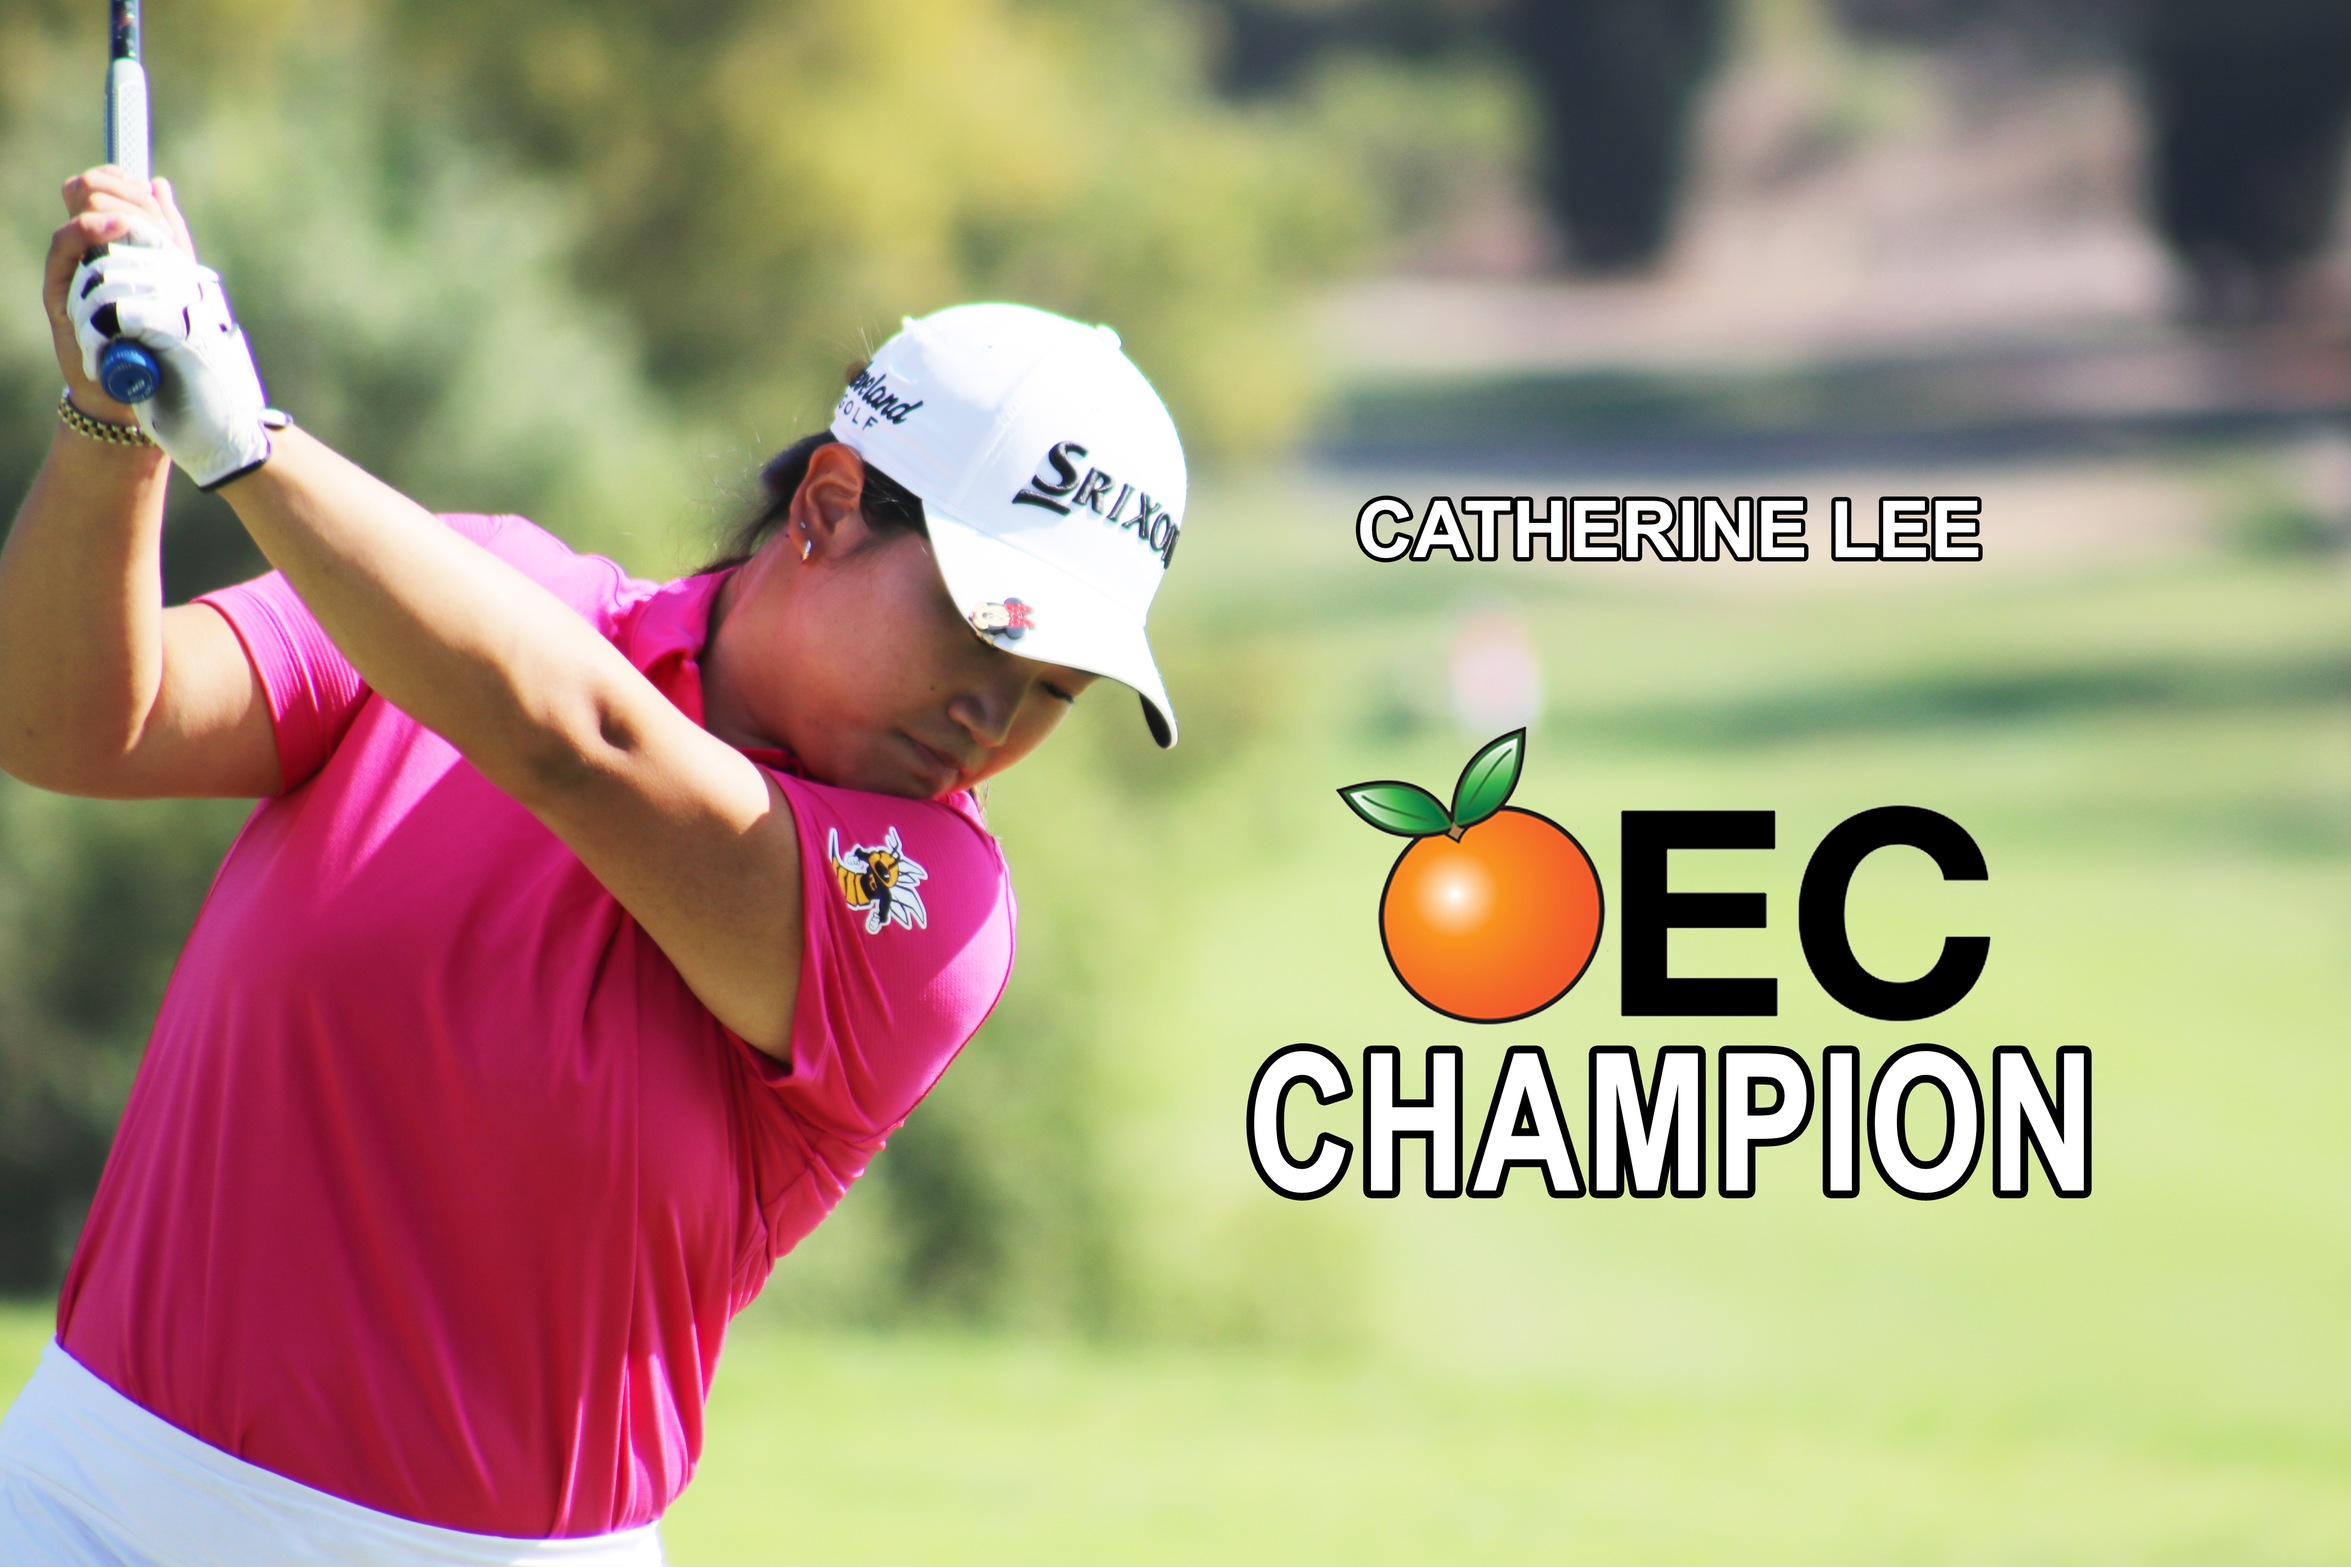 CATHILYN LEE IS THE OEC CHAMPION!